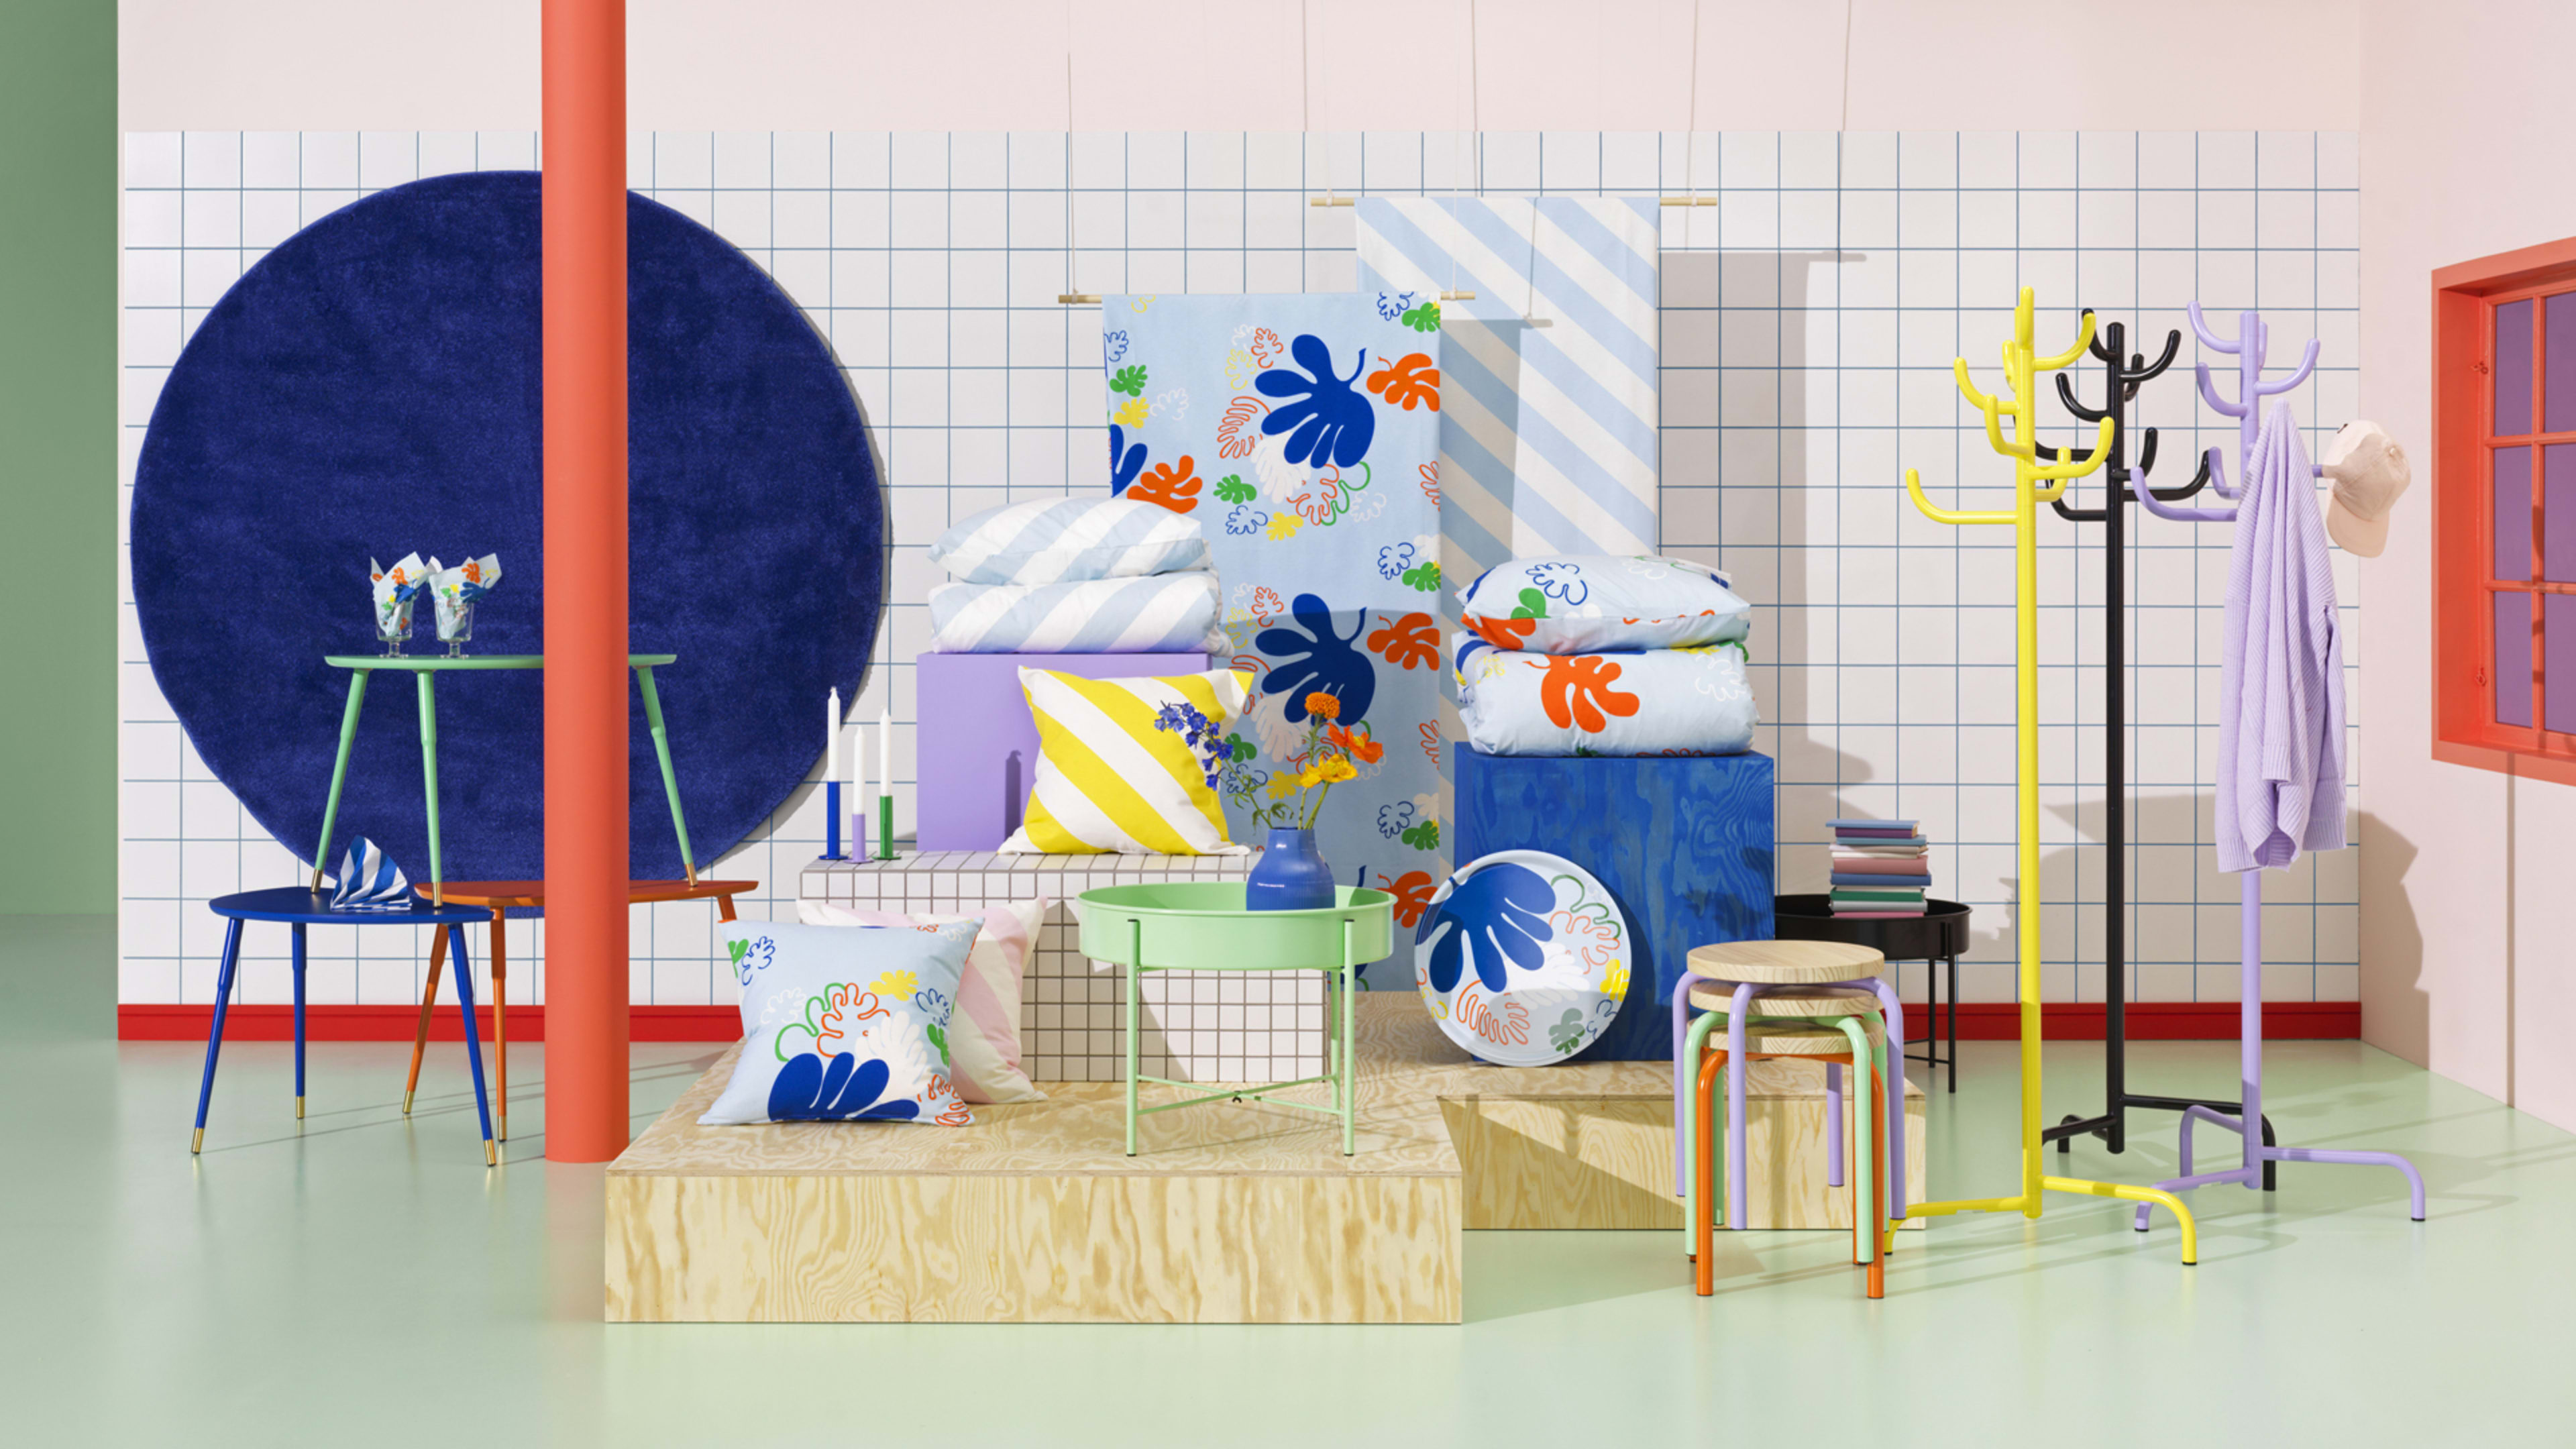 Ikea dusts off its archives for its new 80th anniversary collection